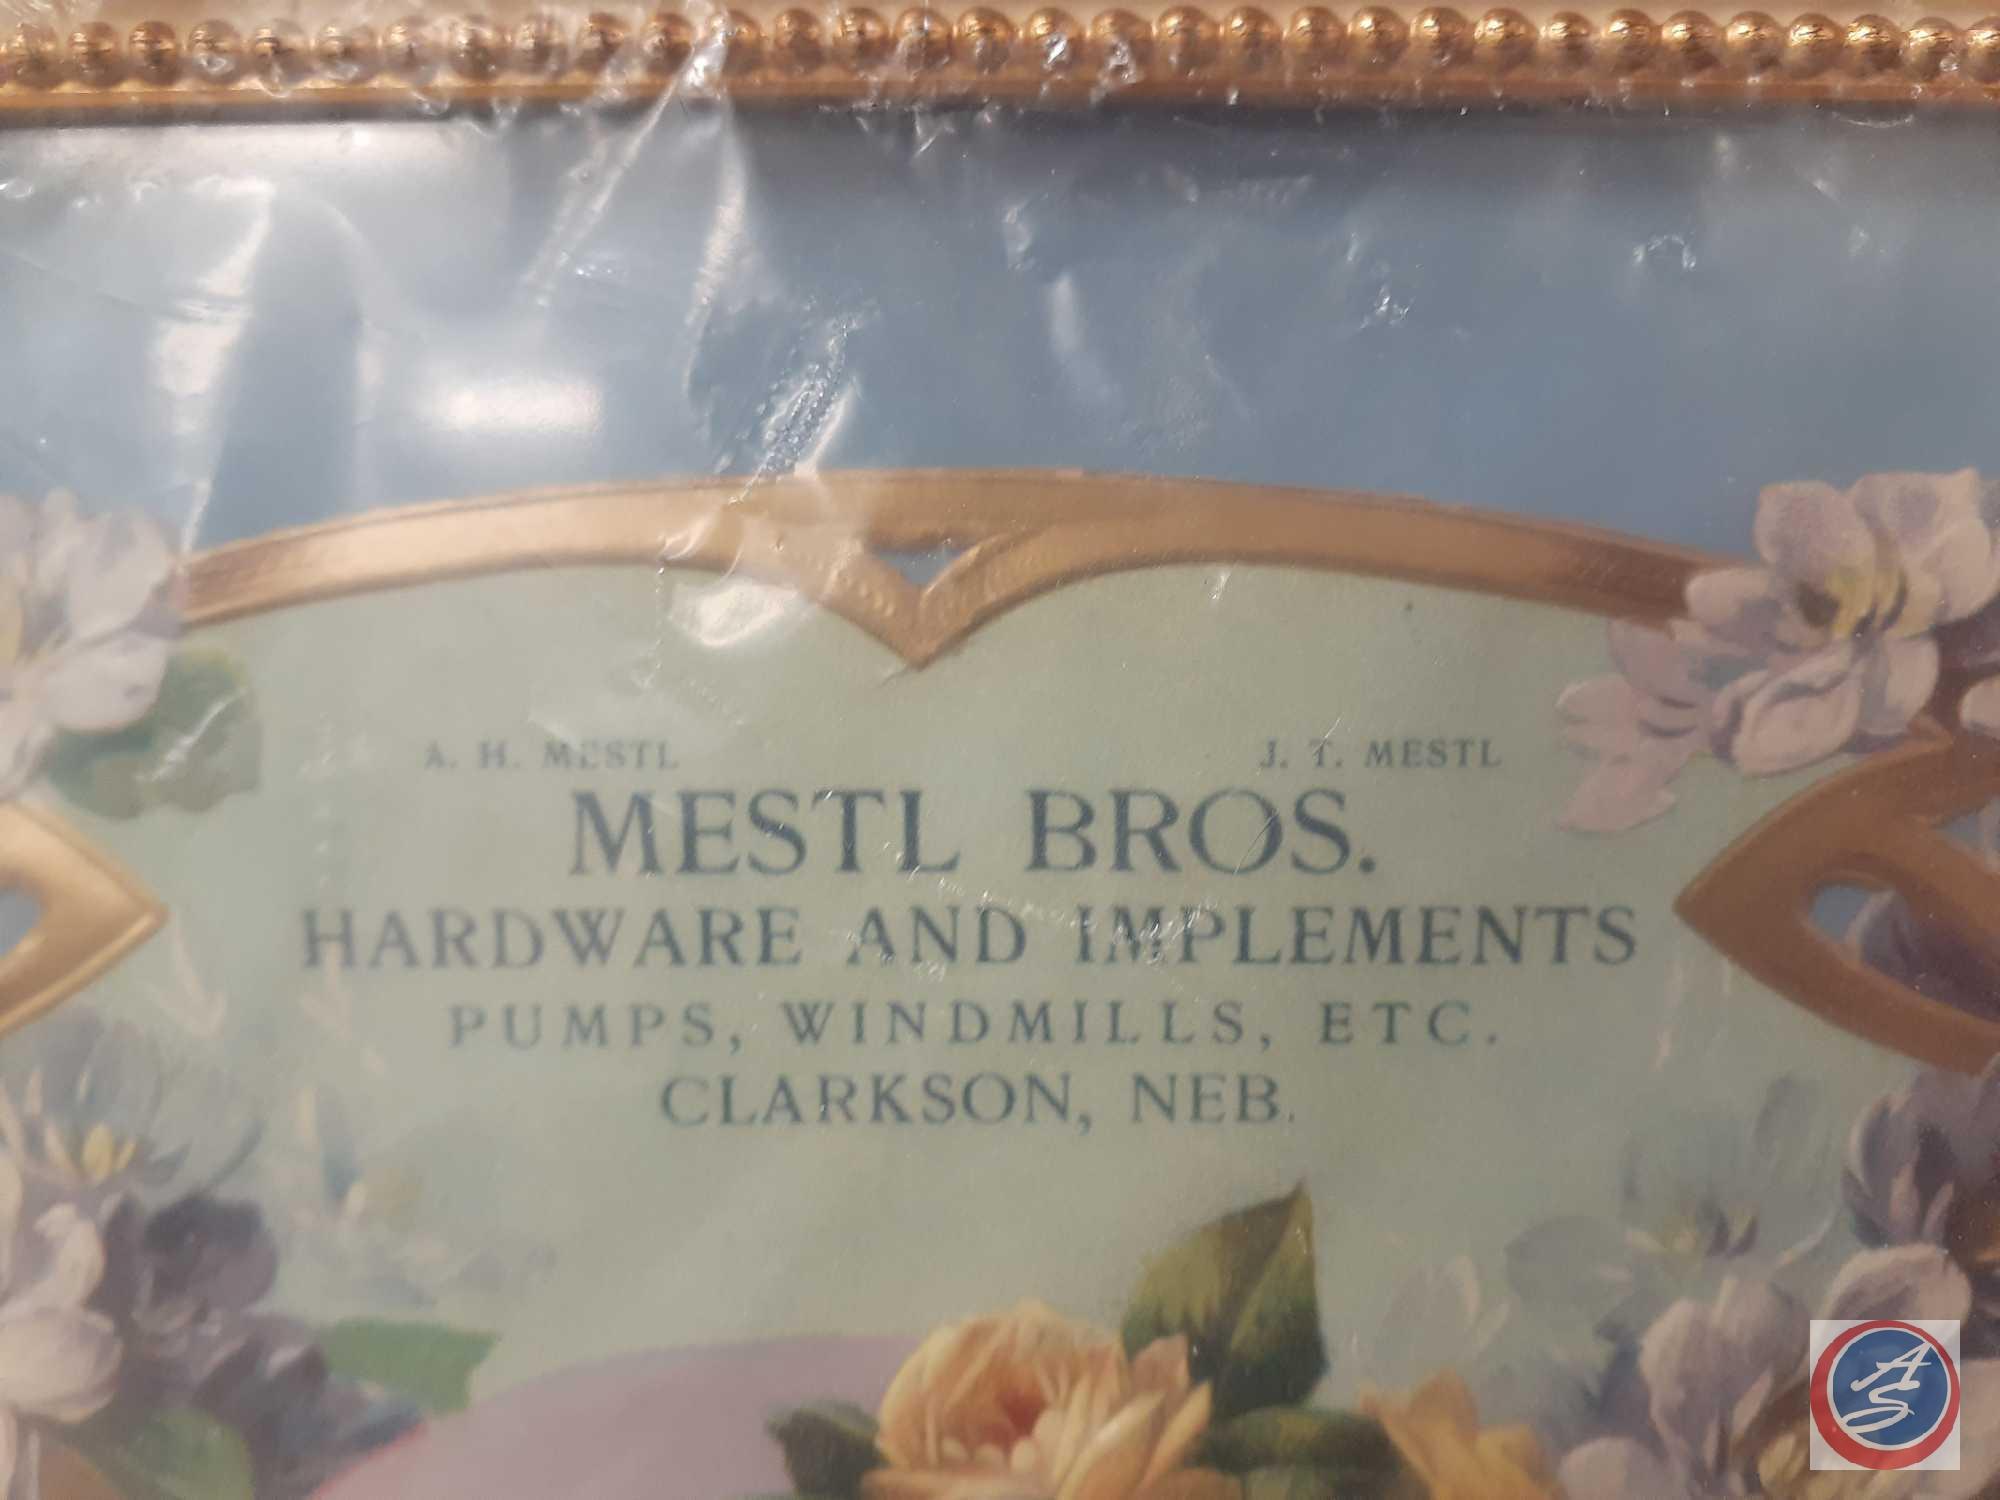 Mestl Bros. Hardware and Implements Framed Calendar From 1906 Measuring 9 3/4'' X 13 3/8'',